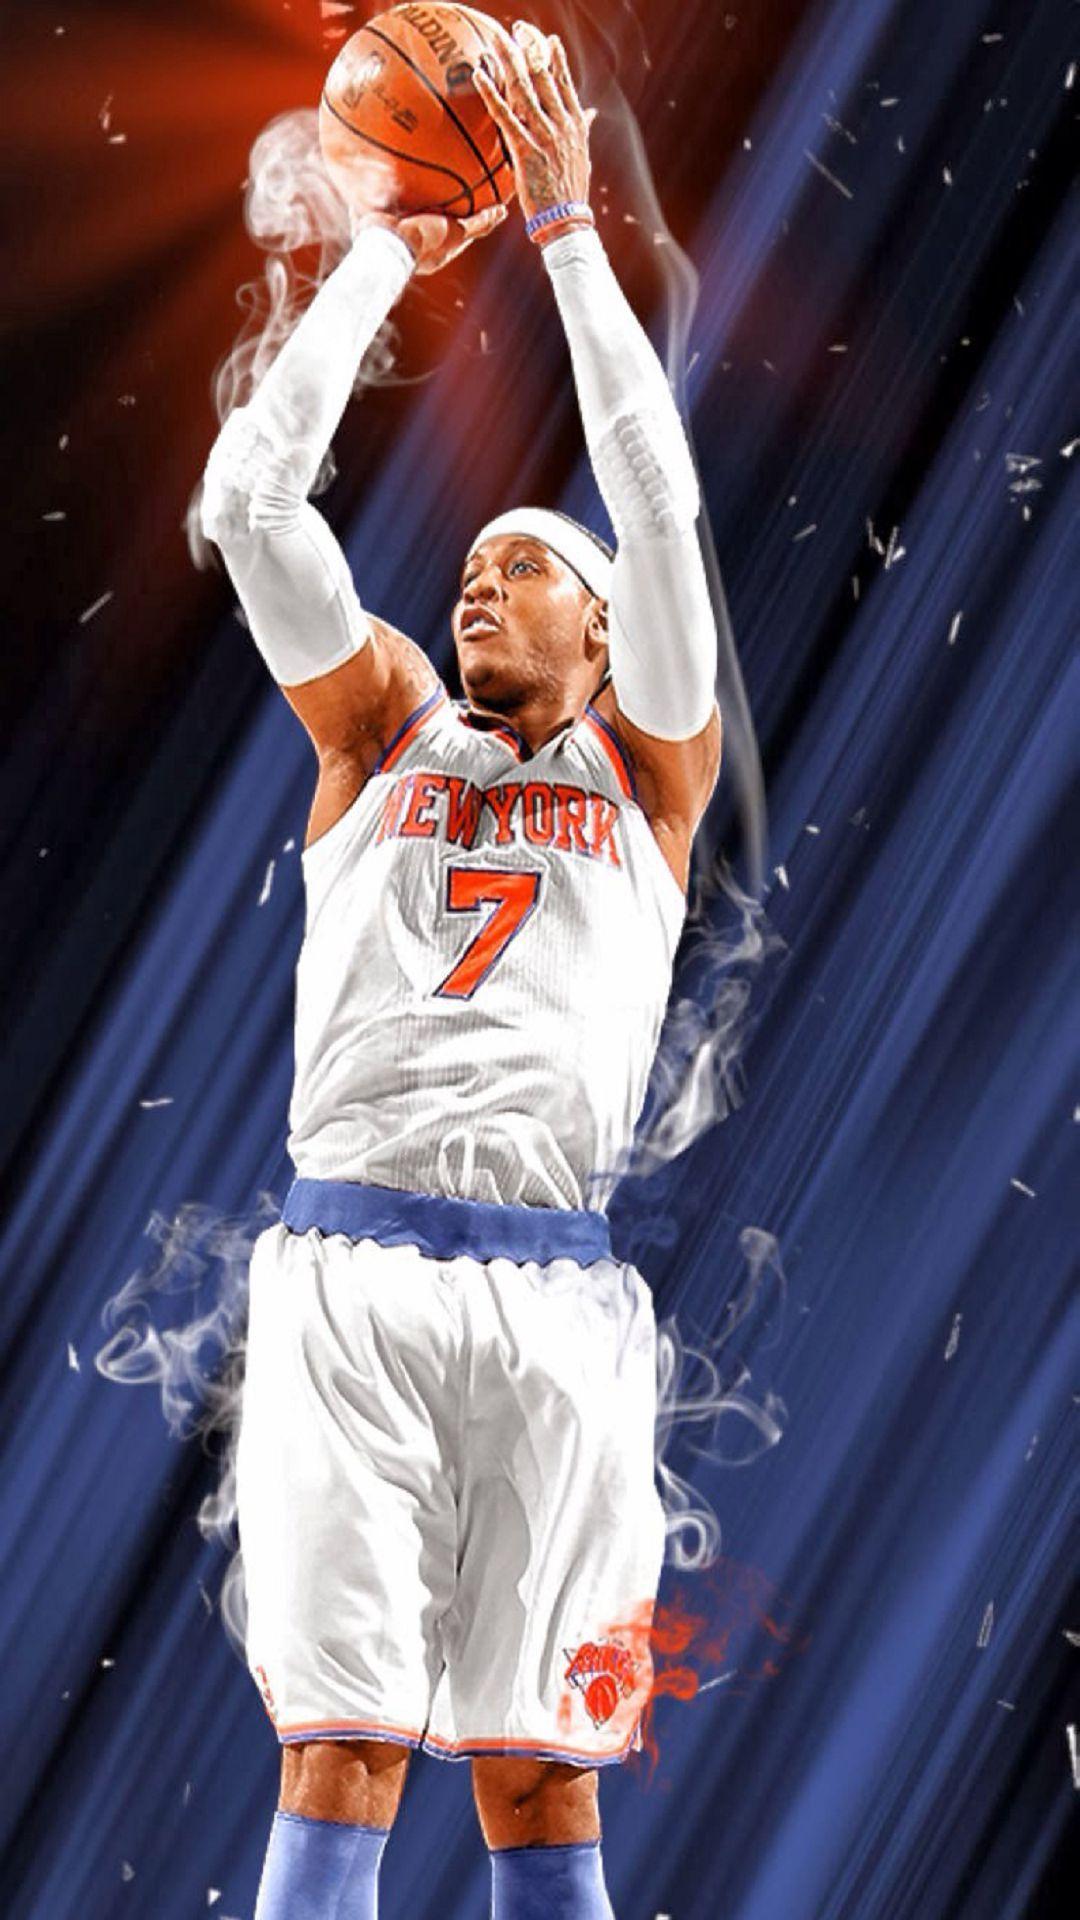 Carmelo Anthony. Daily Android Wallpaper. NBA, Nba